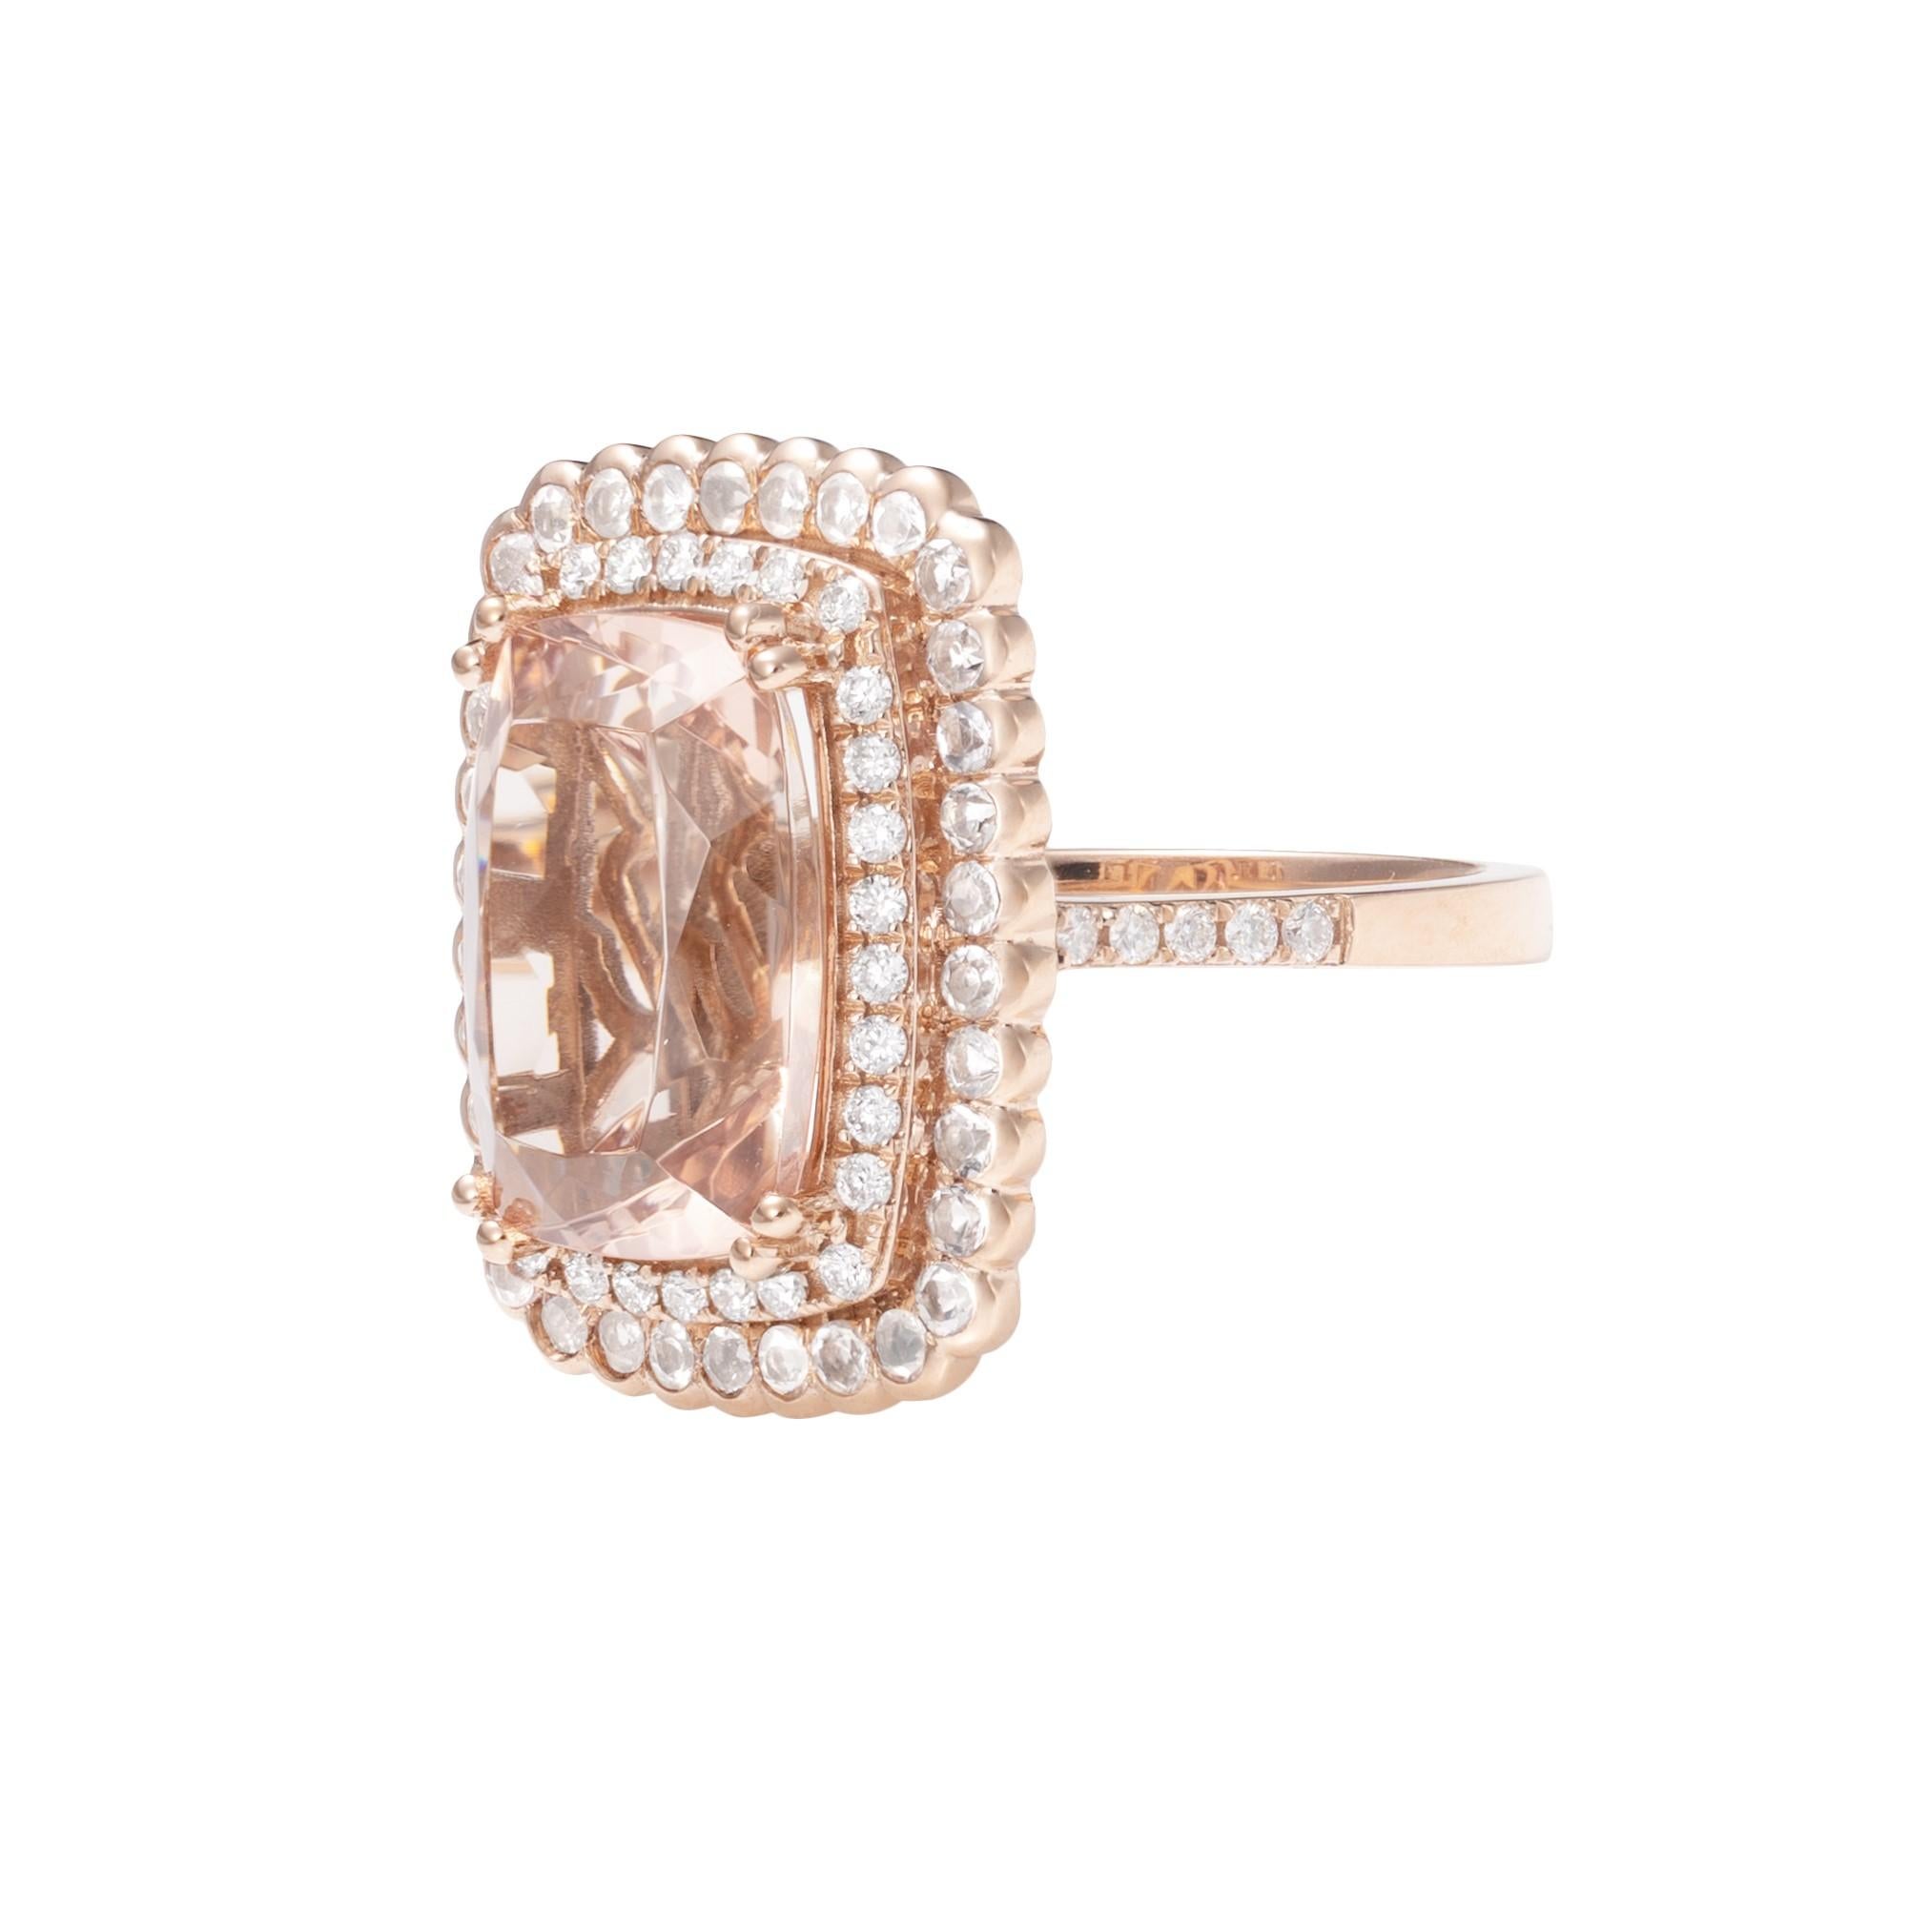 Contemporary 6.6 Carat Morganite and Diamond Ring in 18 Karat Rose Gold For Sale